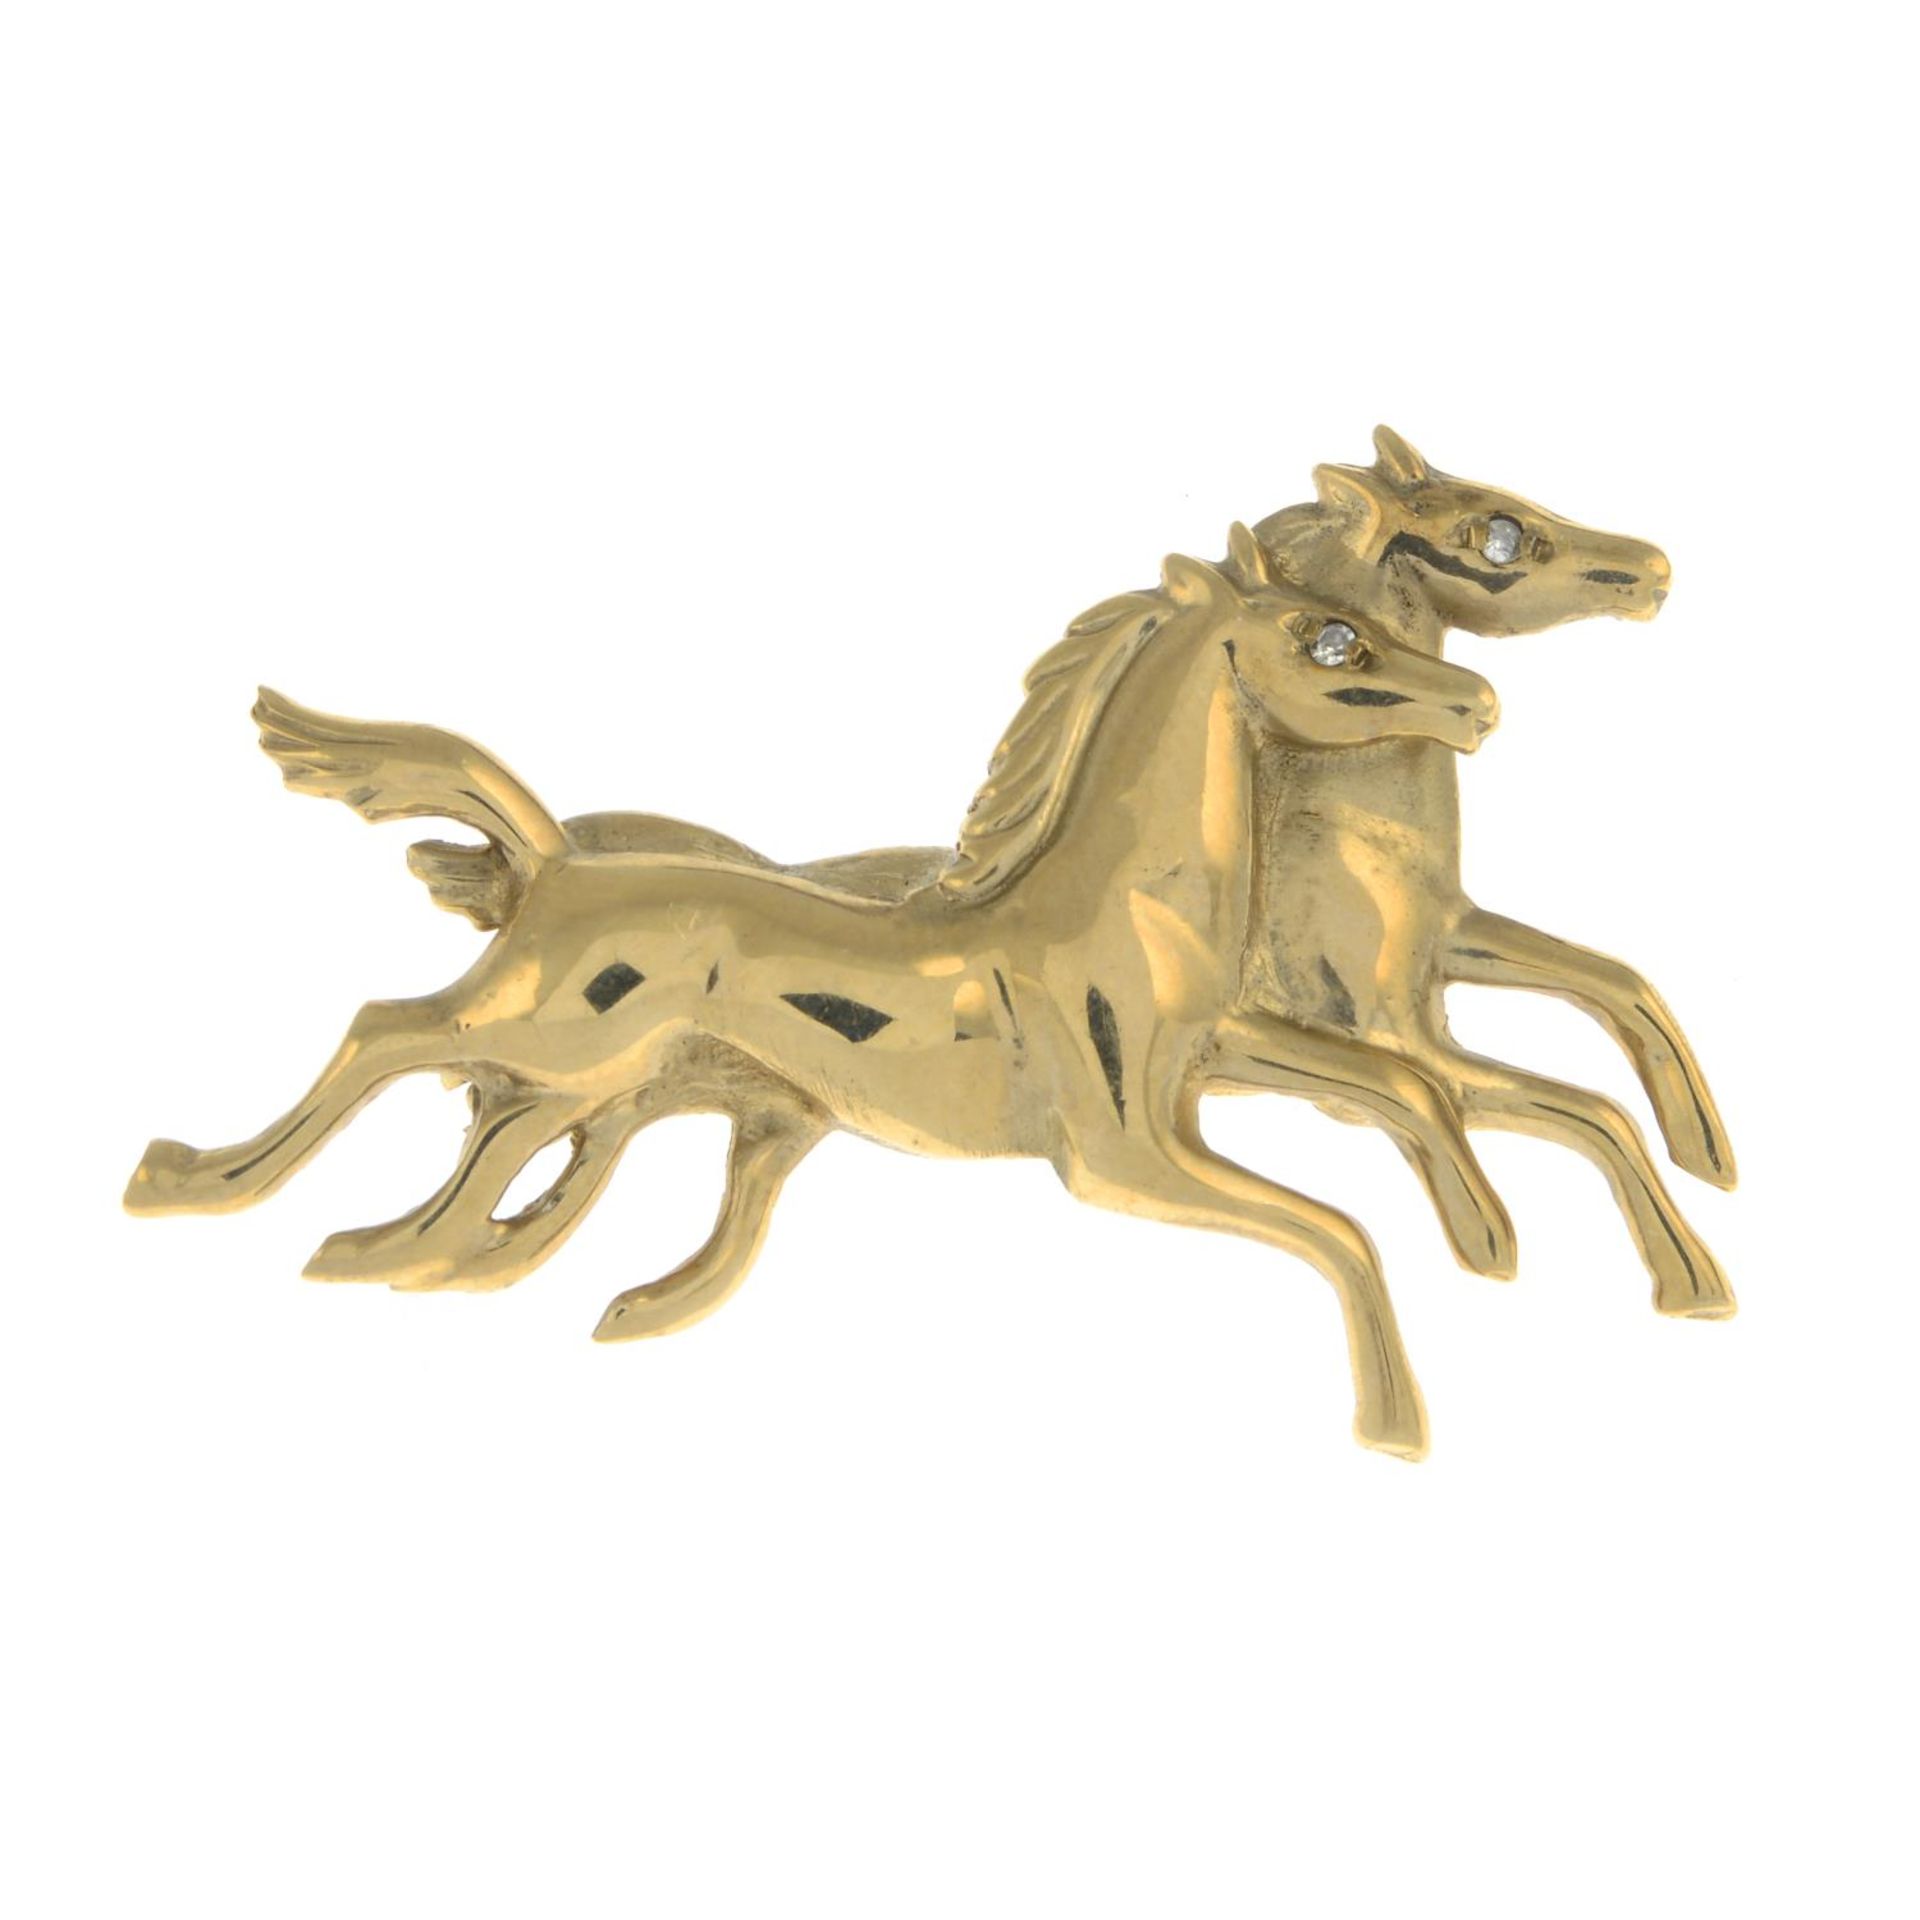 A 9ct gold brooch of galloping horses with diamond accents.Hallmarks for Birmingham.Length 4.8cms.